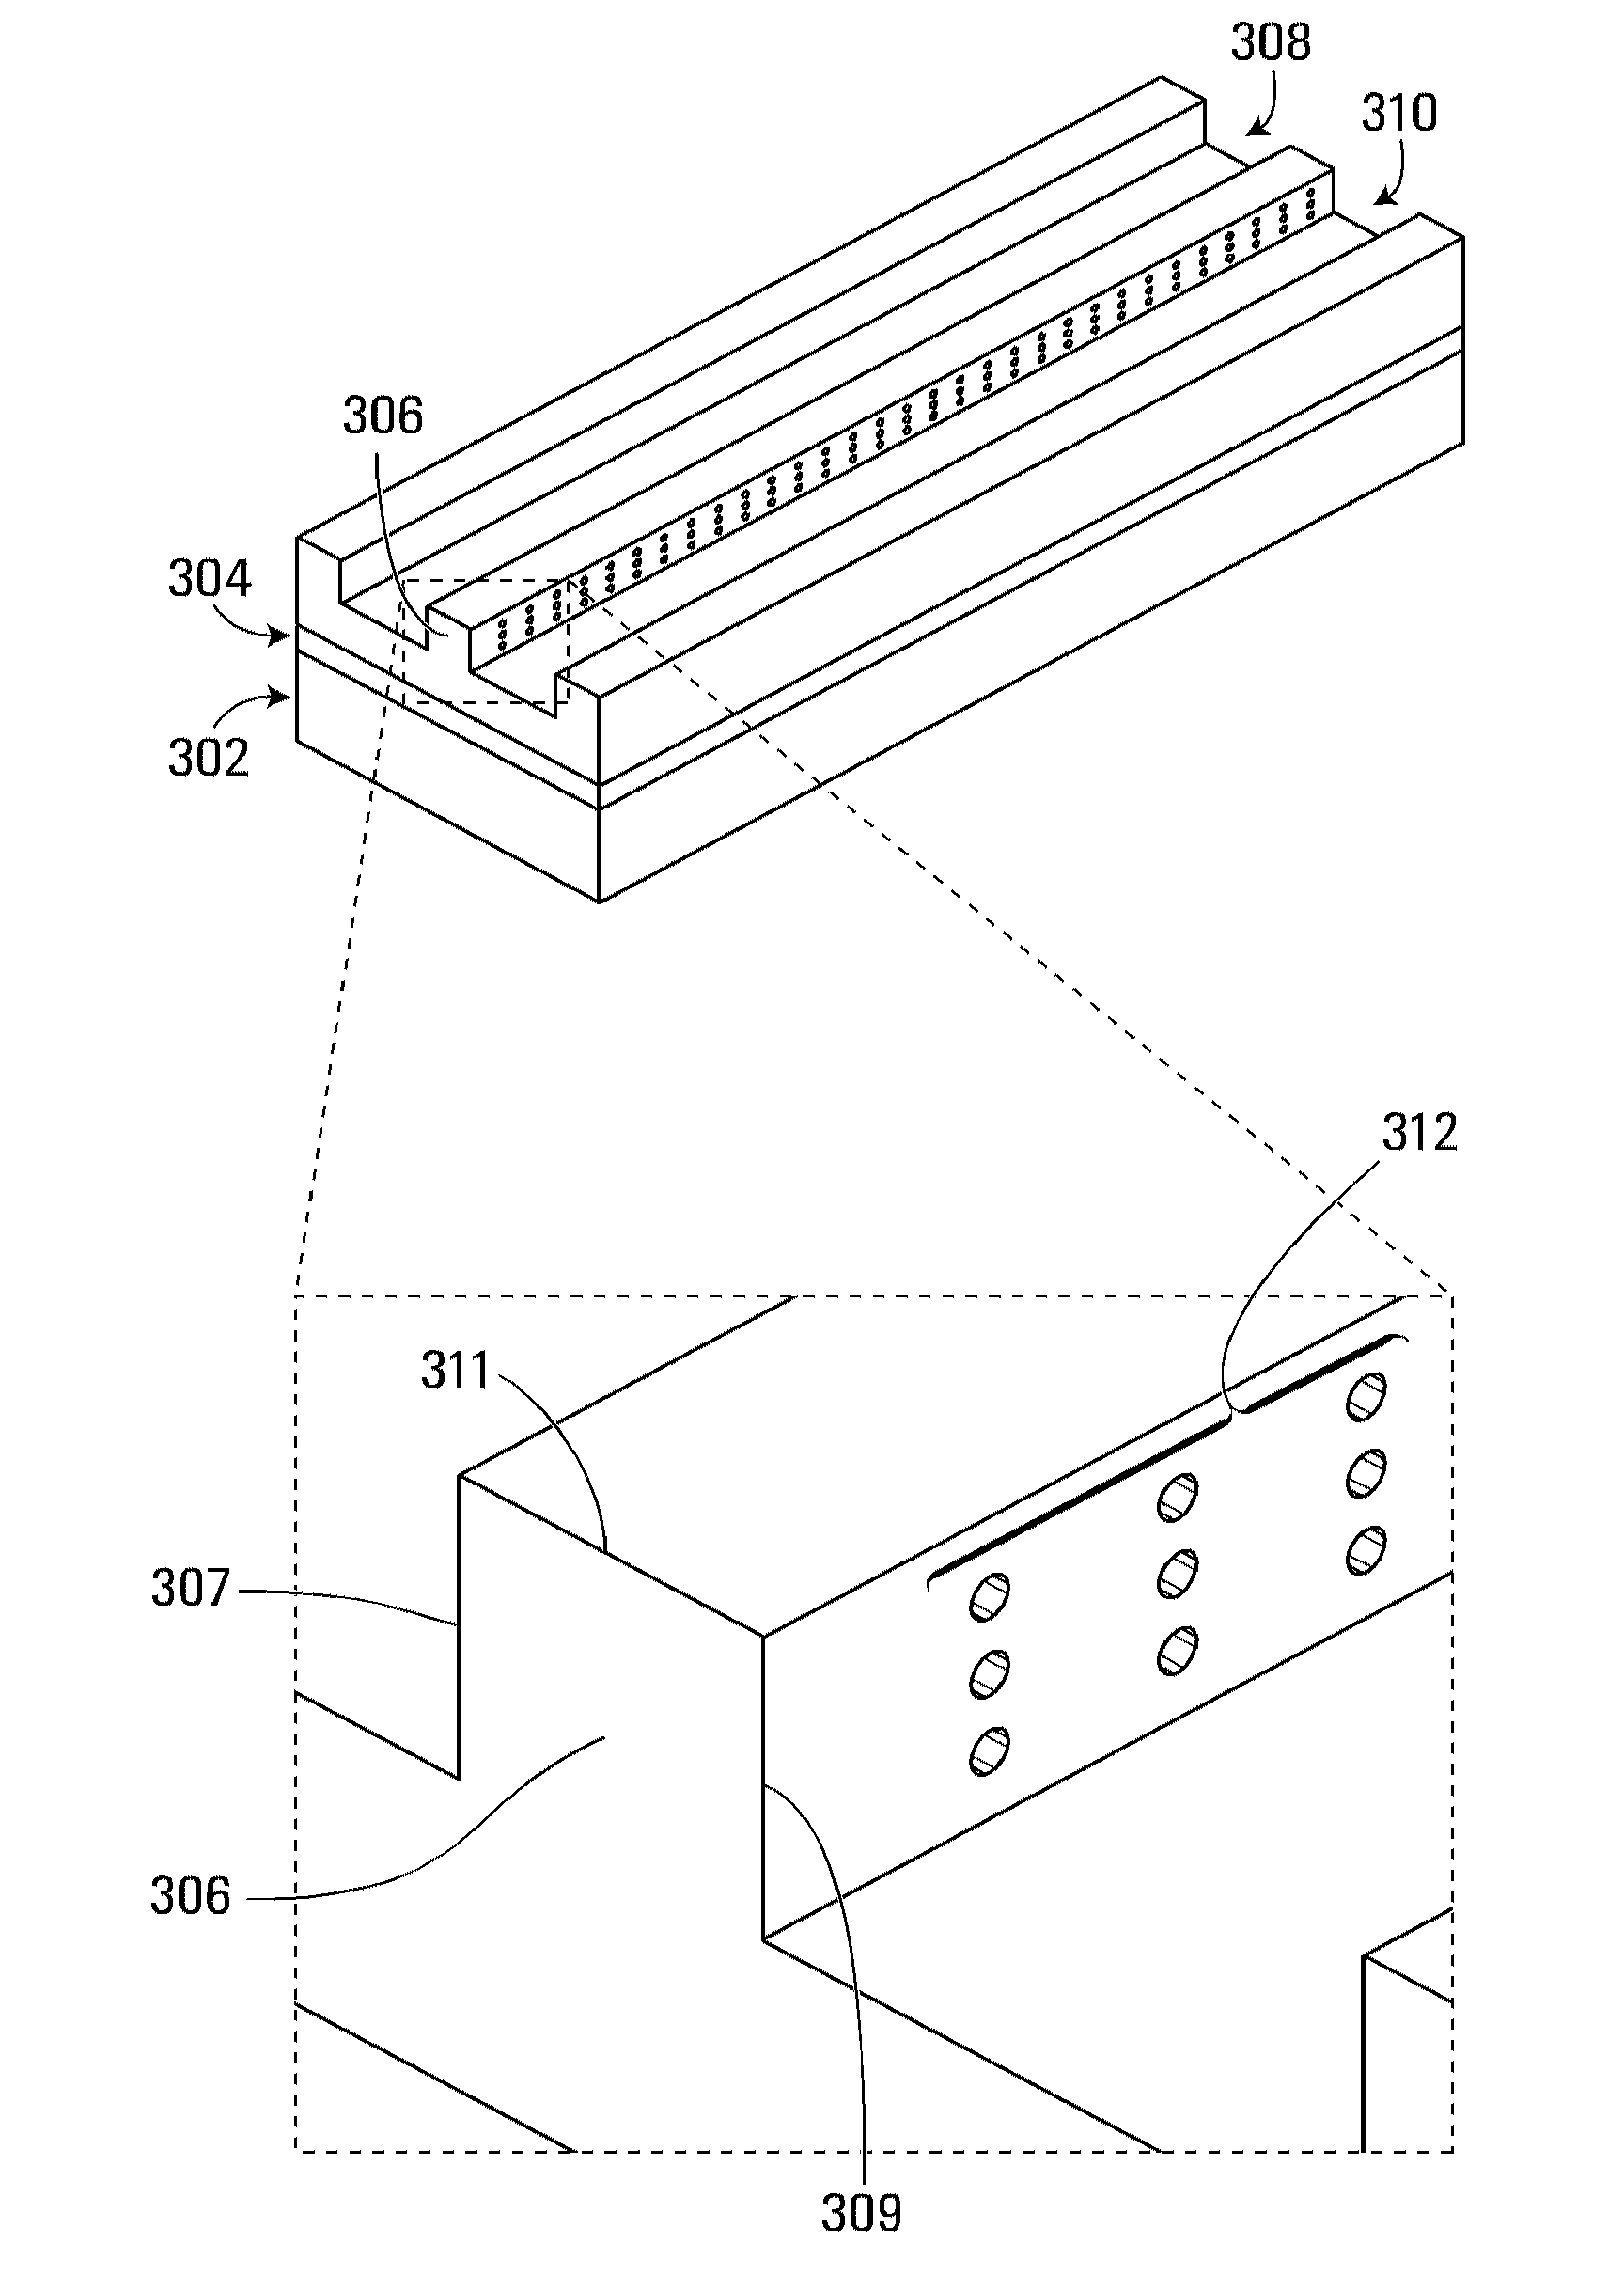 Nano-enhanced evanescence integrated technique (NEET) based microphotonic device and sample analysis system